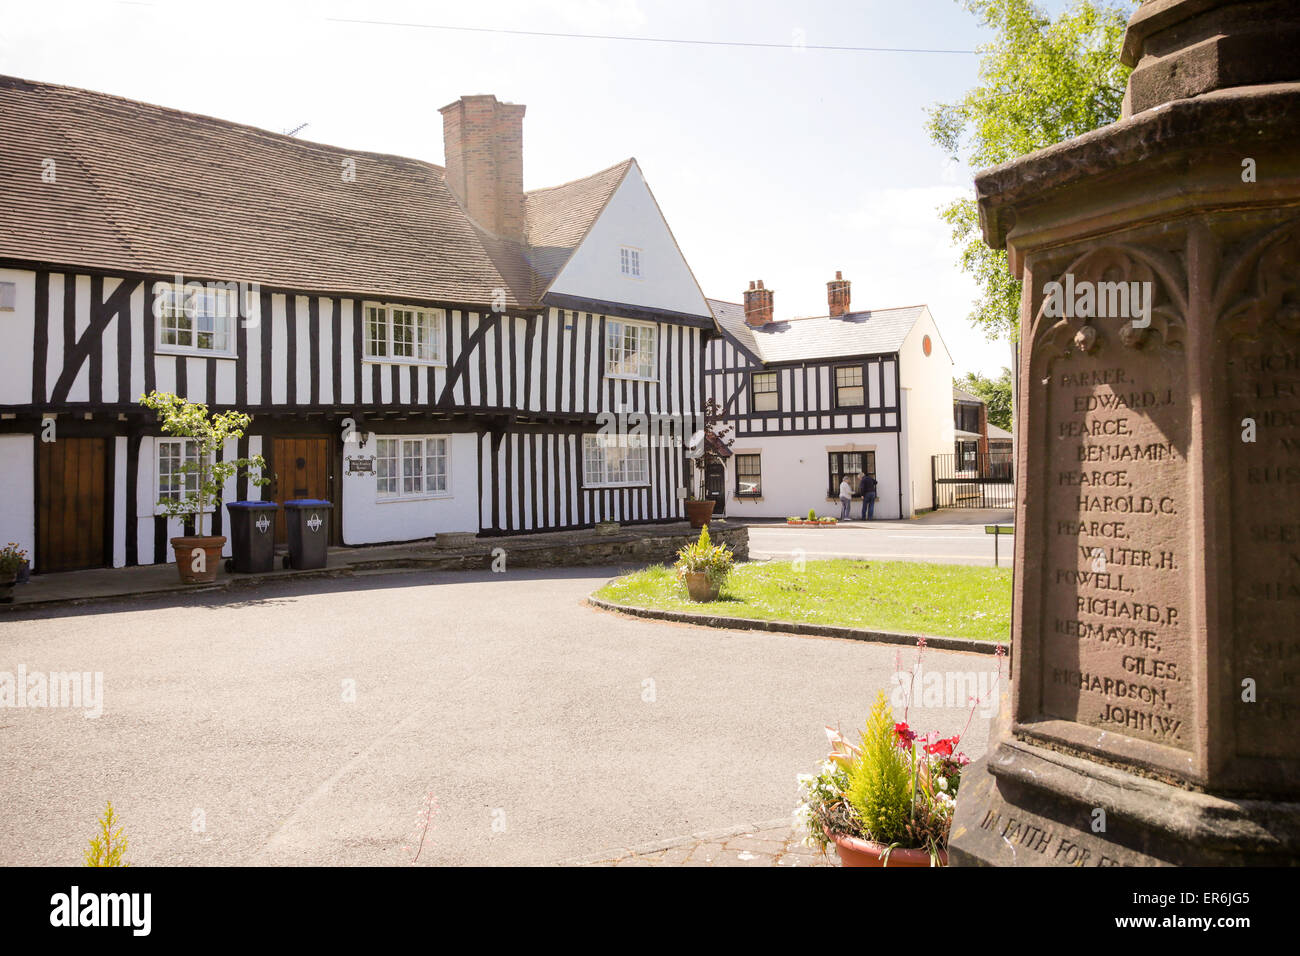 A half timbered old building near to a war memorial in an English village Stock Photo